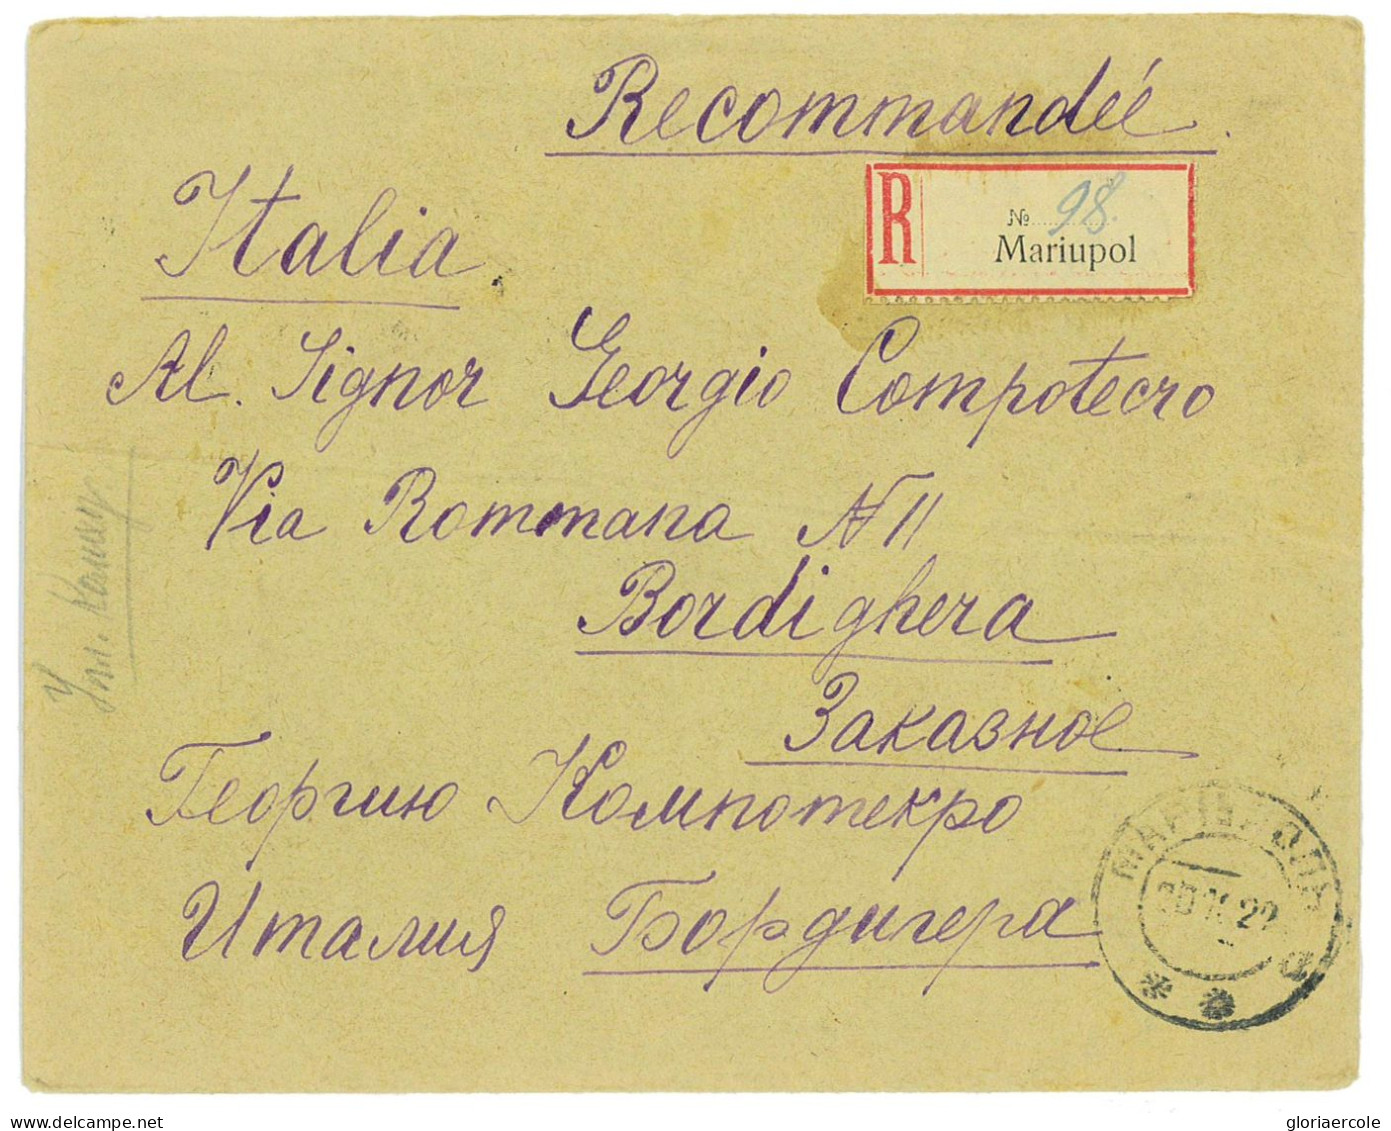 P2923 - RUSSIA, LETTER TO ITALY, FRANKED WITH 18 STAMP BLOCK OF 5 KOPED 20.10.1922 FROM MARIUPOL REGISTRED - Briefe U. Dokumente